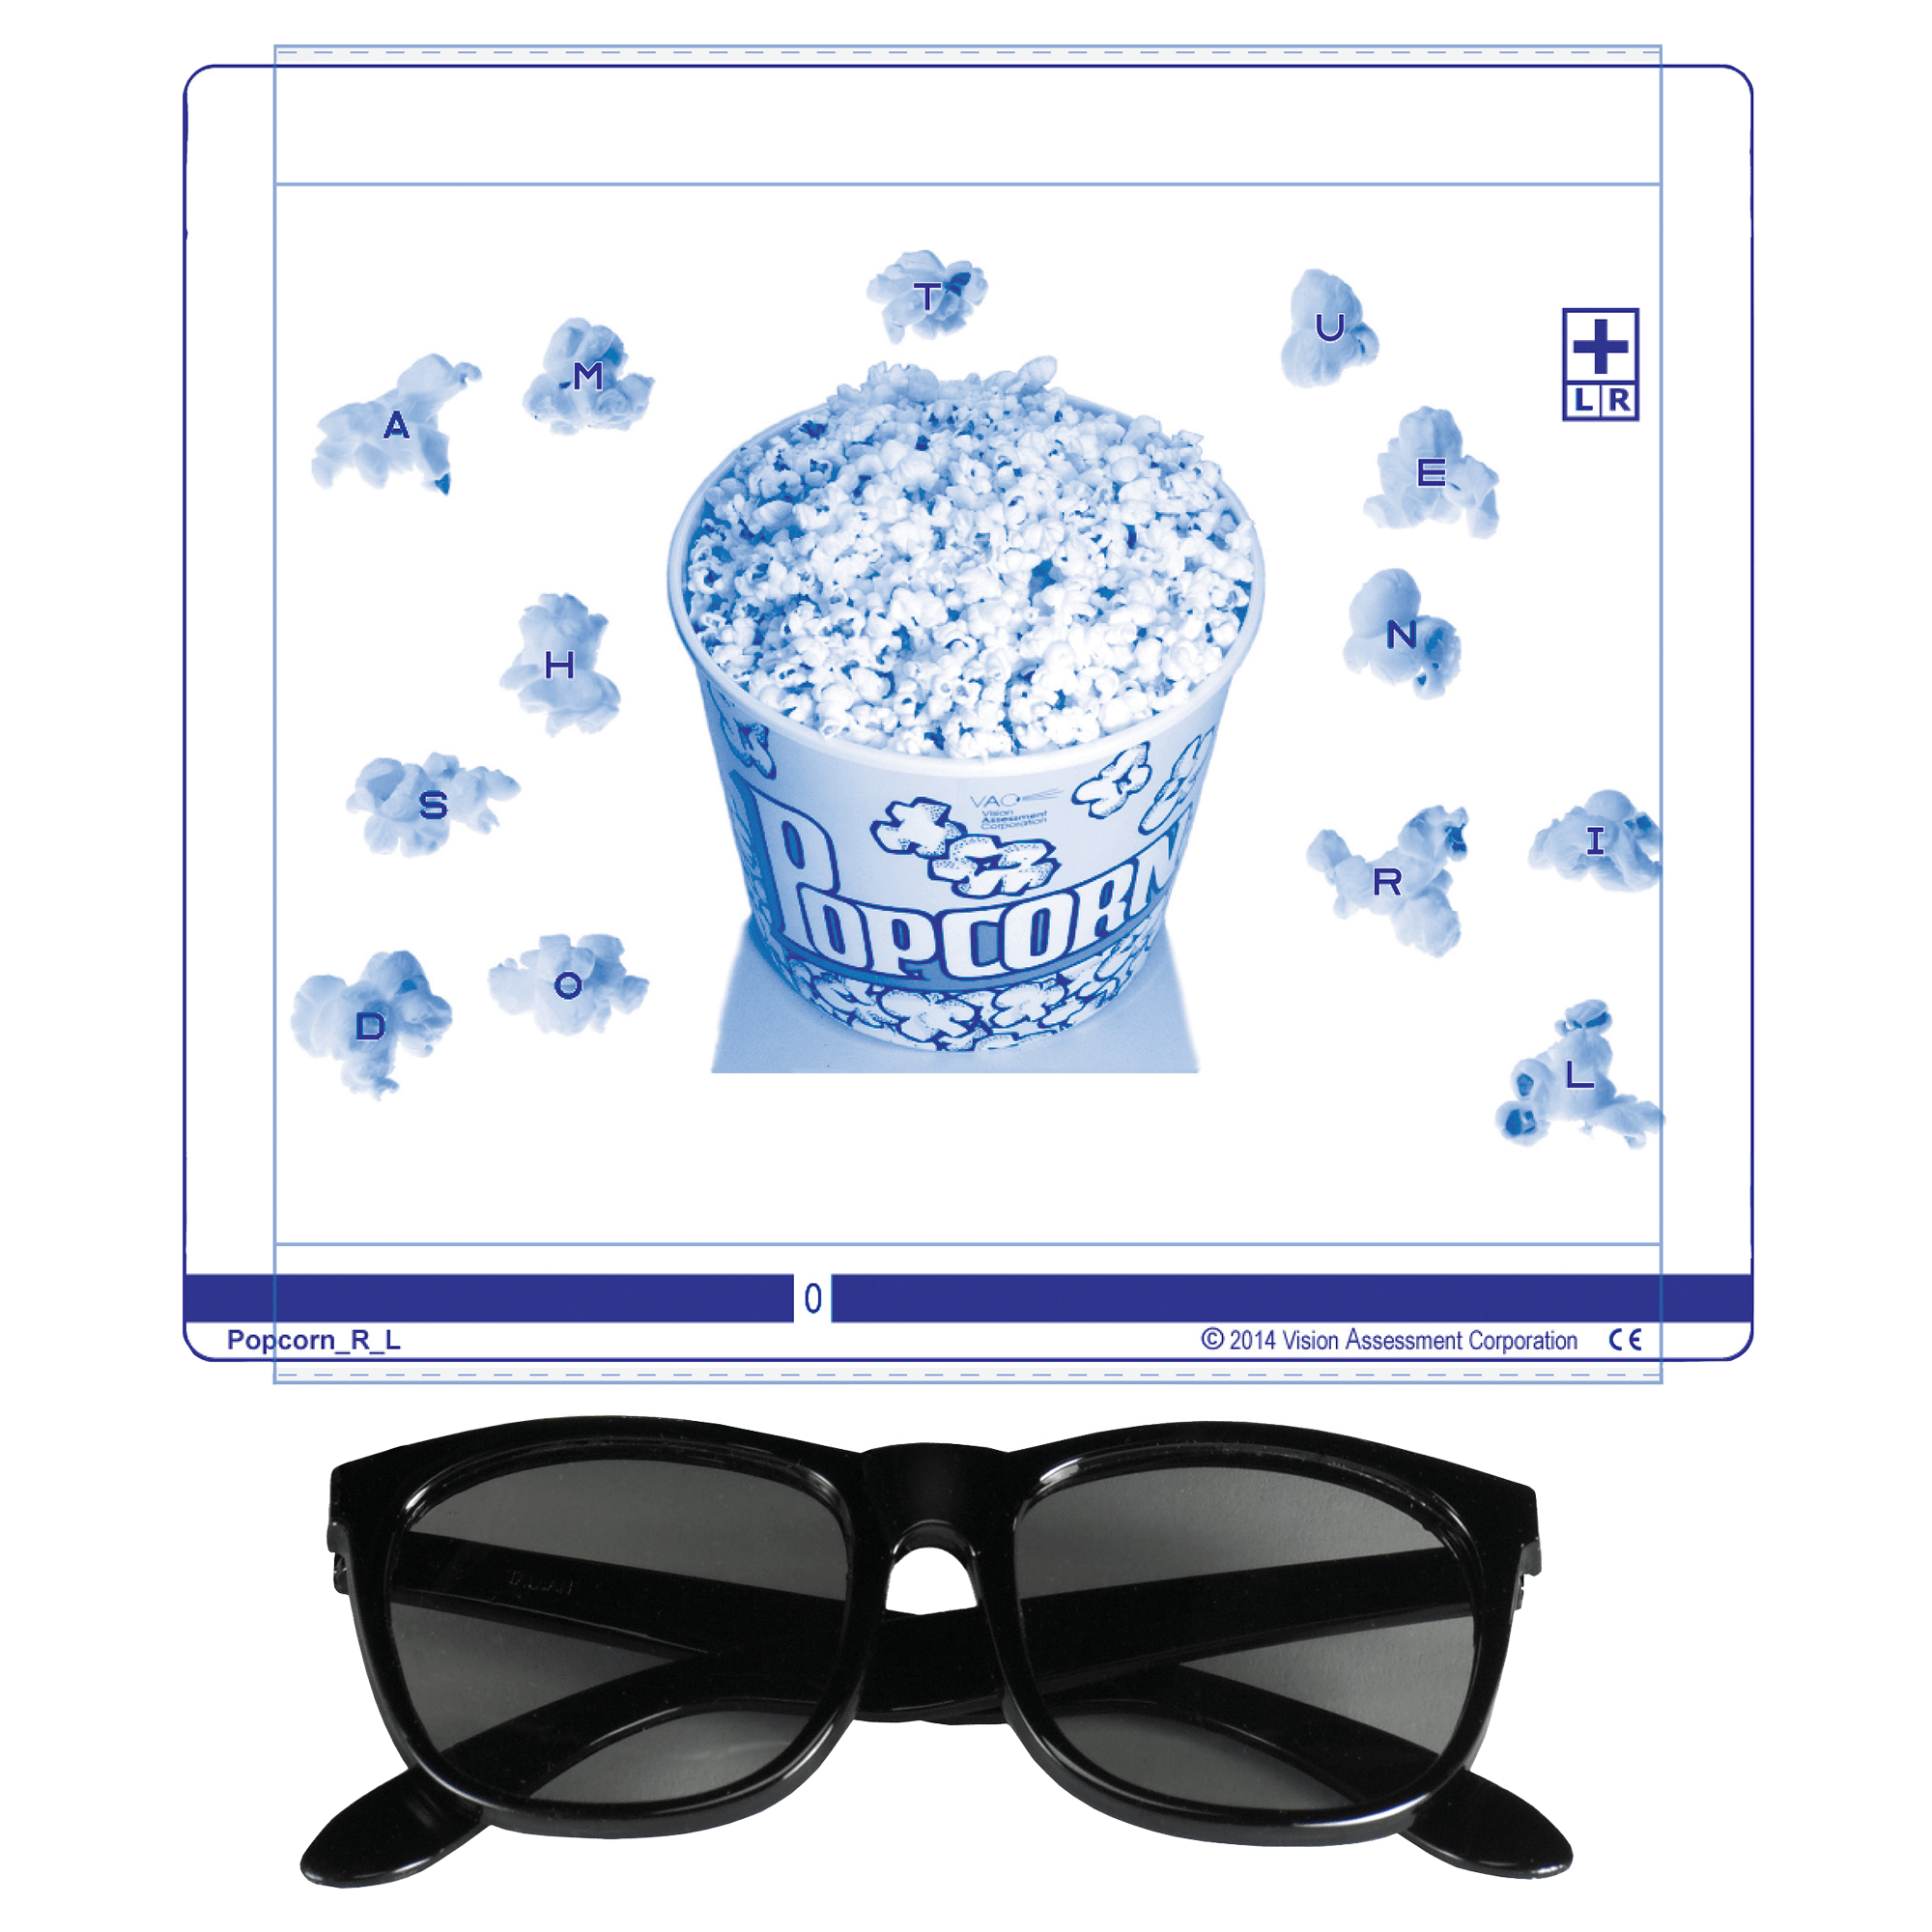 Good-Lite Popcorn Polarized Variable Vectograph Vision Therapy System